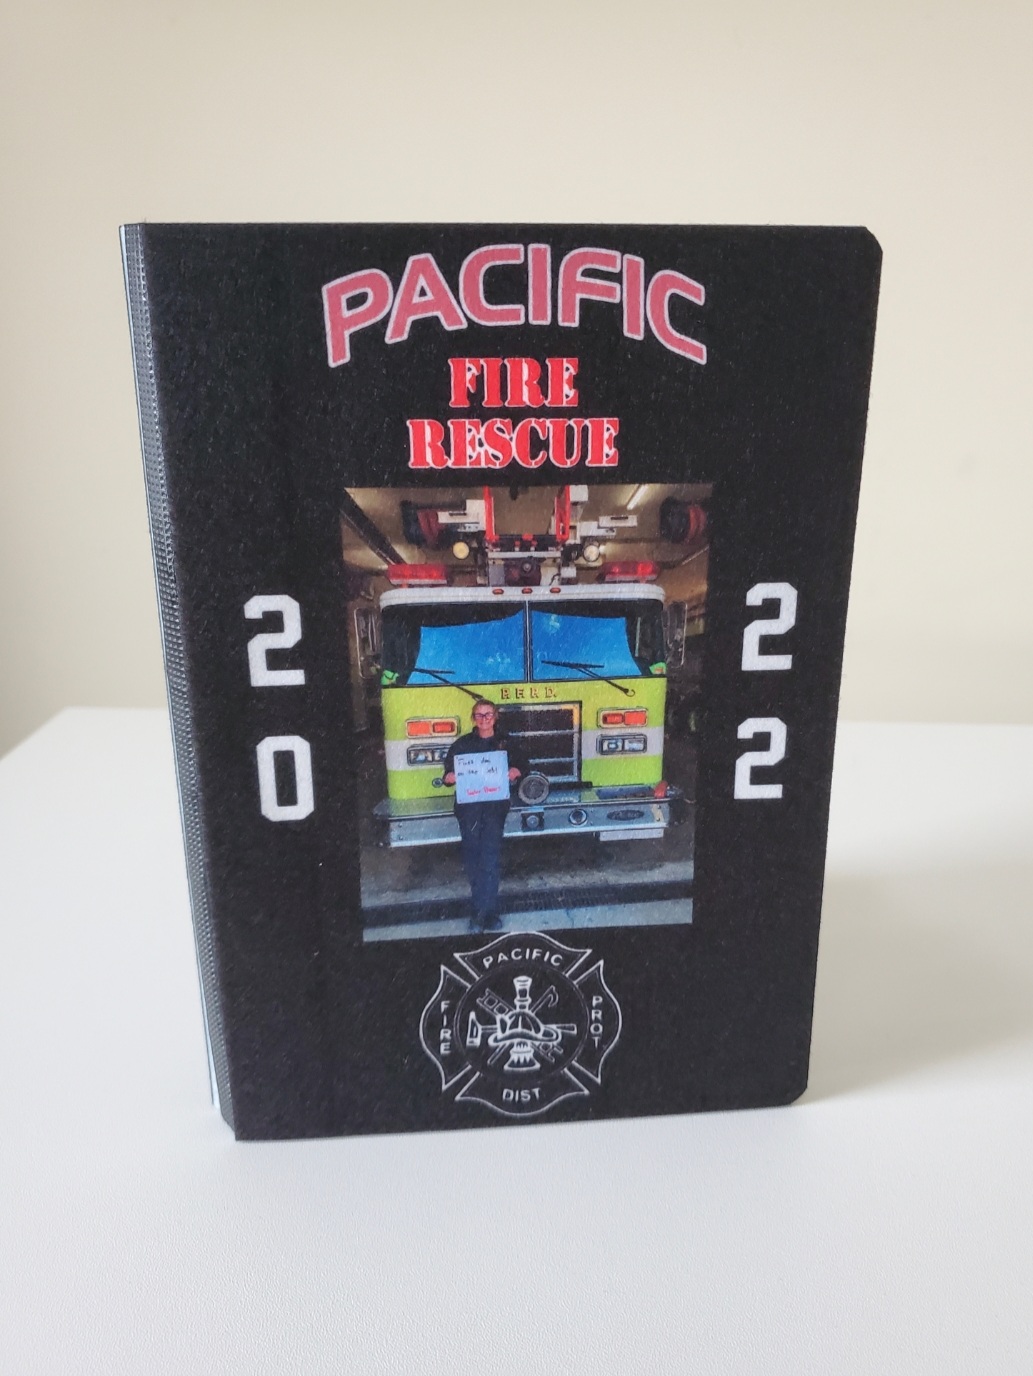 A journal for a firefighter to write about her calls.